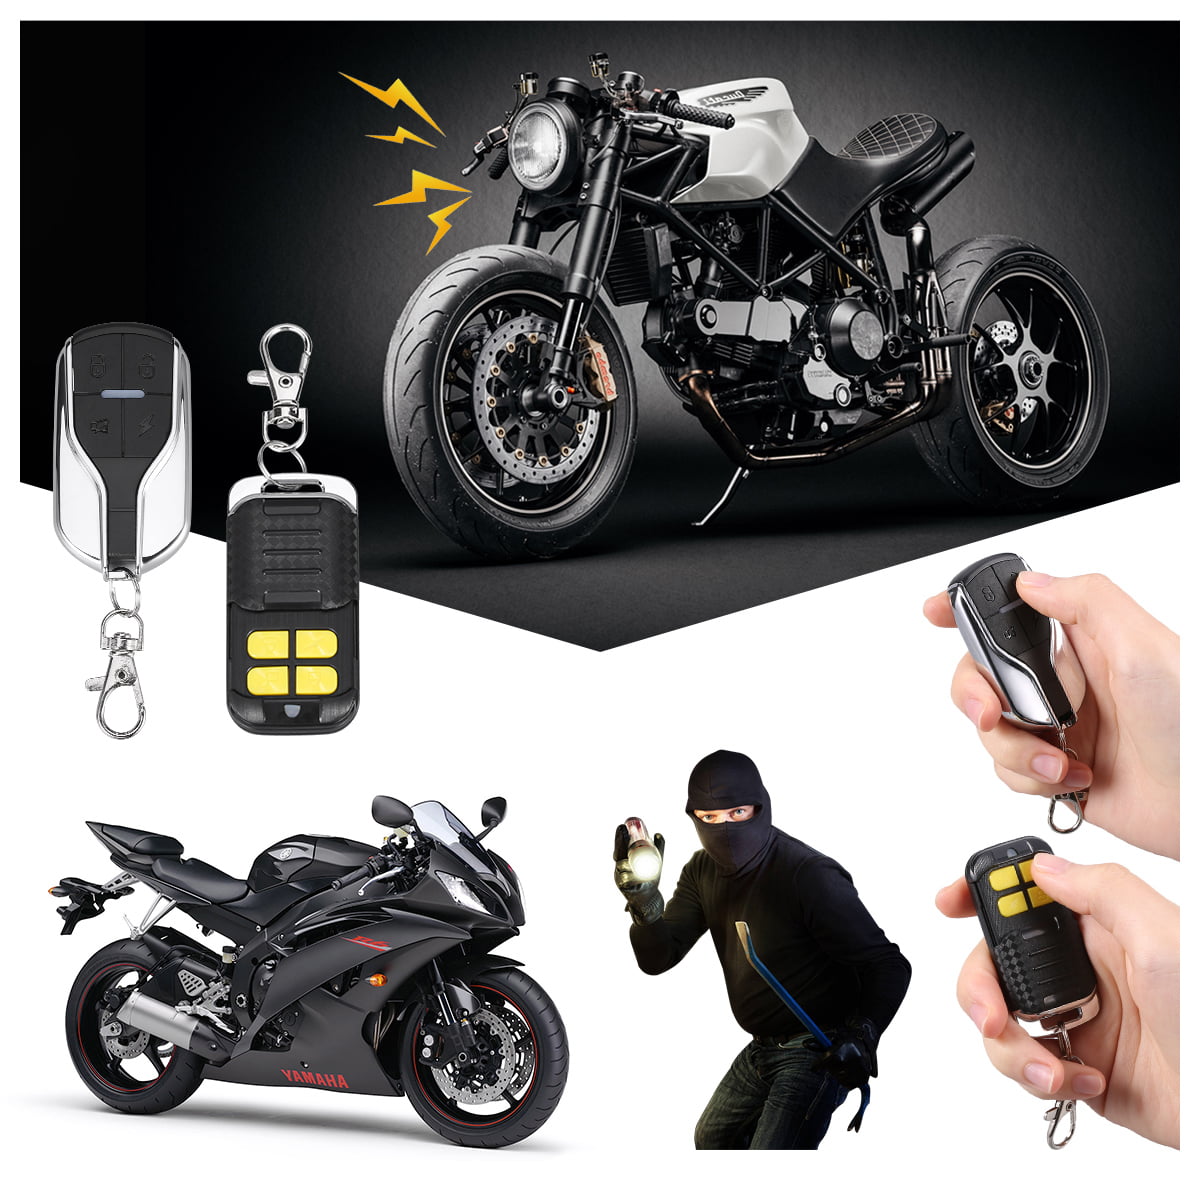 Qiilu Motorcycle Bike Anti-theft Security Alarm System Remote Control 12V 